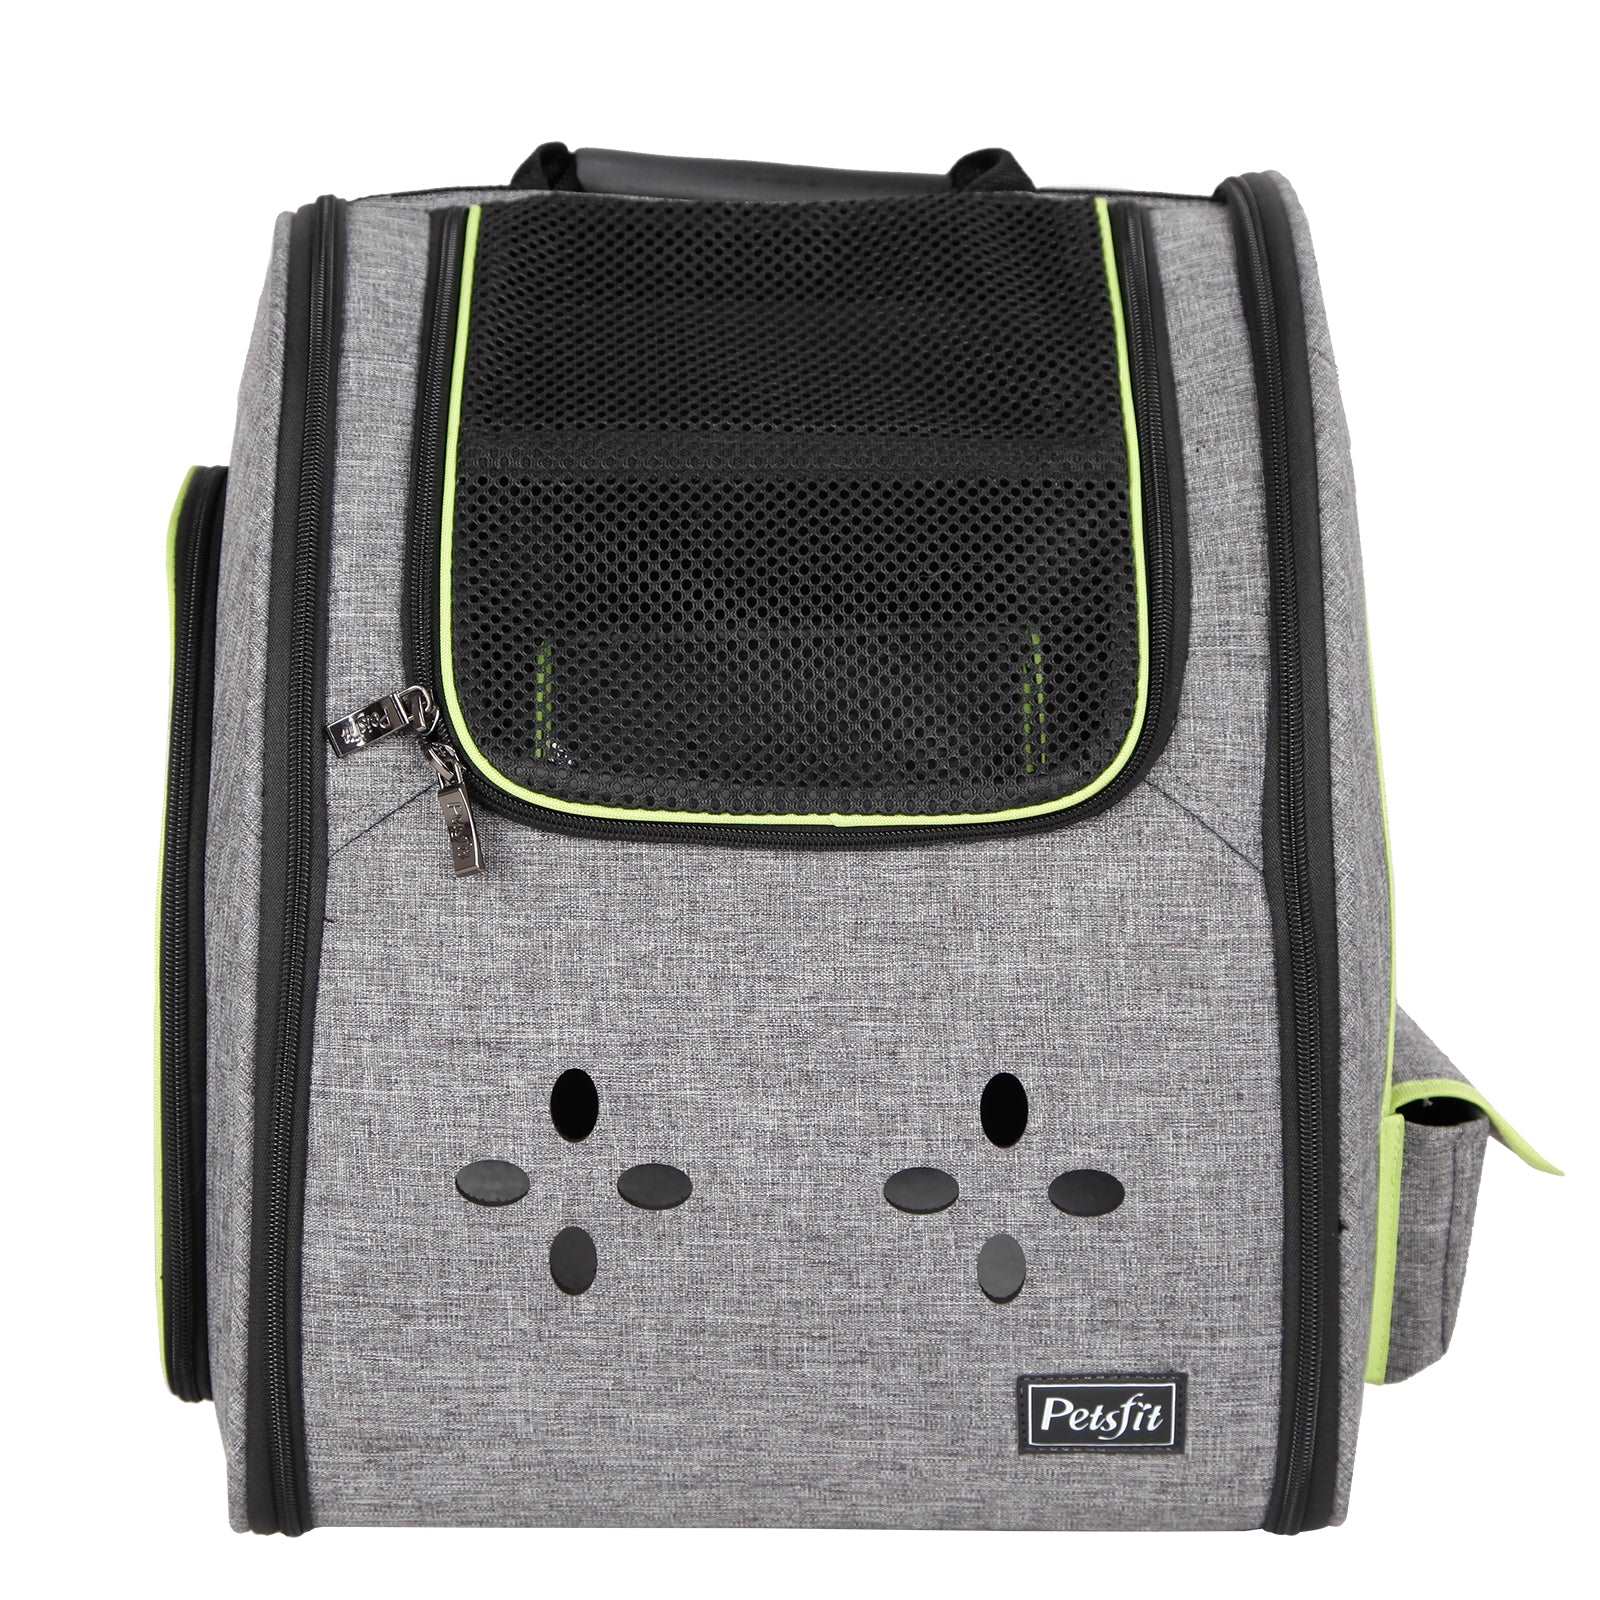 Petsfit-Cat-and-Dog-Backpack-Carrier-Soft-Side-with-Good-Ventilation-03